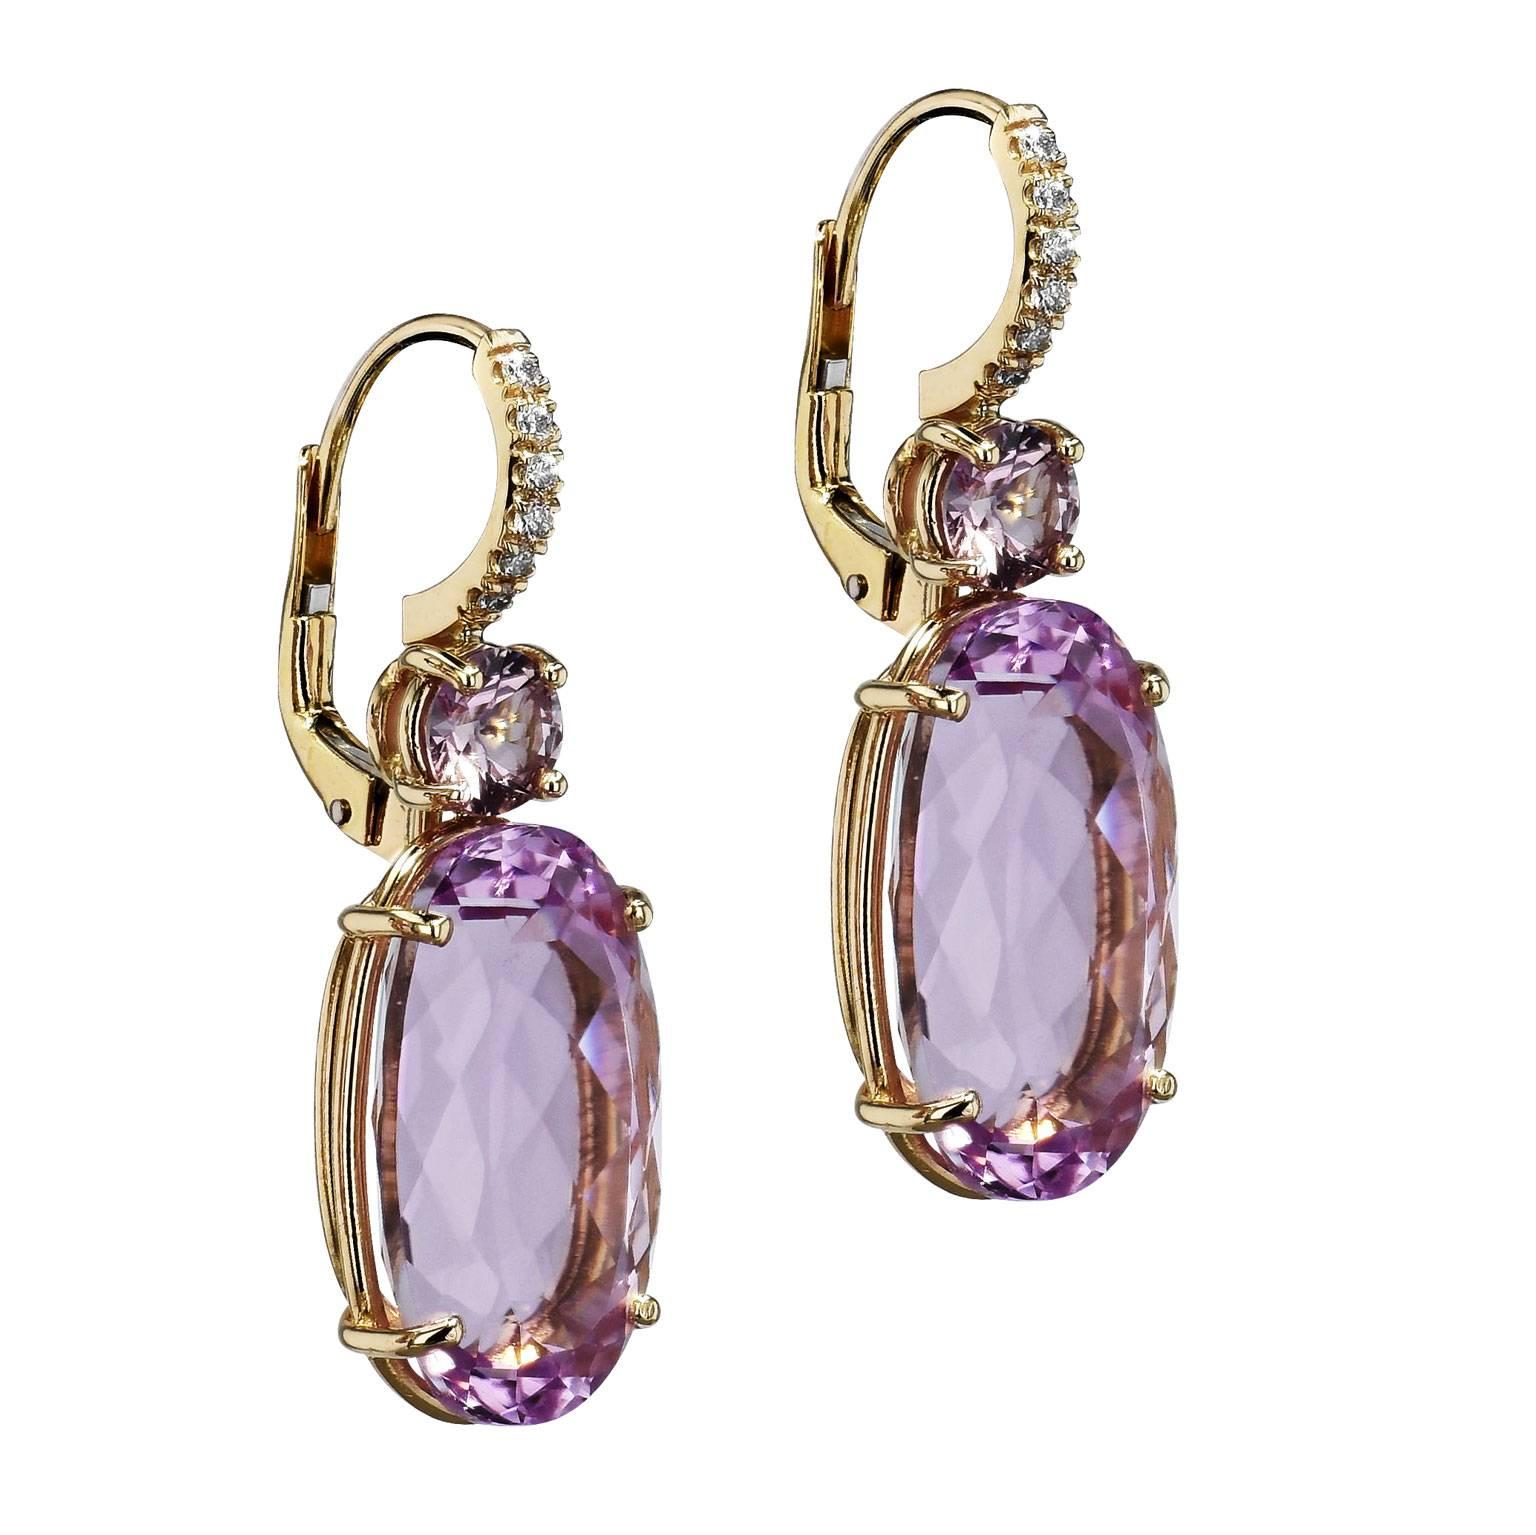 Feminine, sensual and soft, these handmade kunzite and pink sapphire lever-back earrings exemplify all that a woman desires in the perfect gift. Fashioned in 18 karat yellow gold, 21.90 carat of oval-shaped kunzite is set below as 1.08 carat of pink